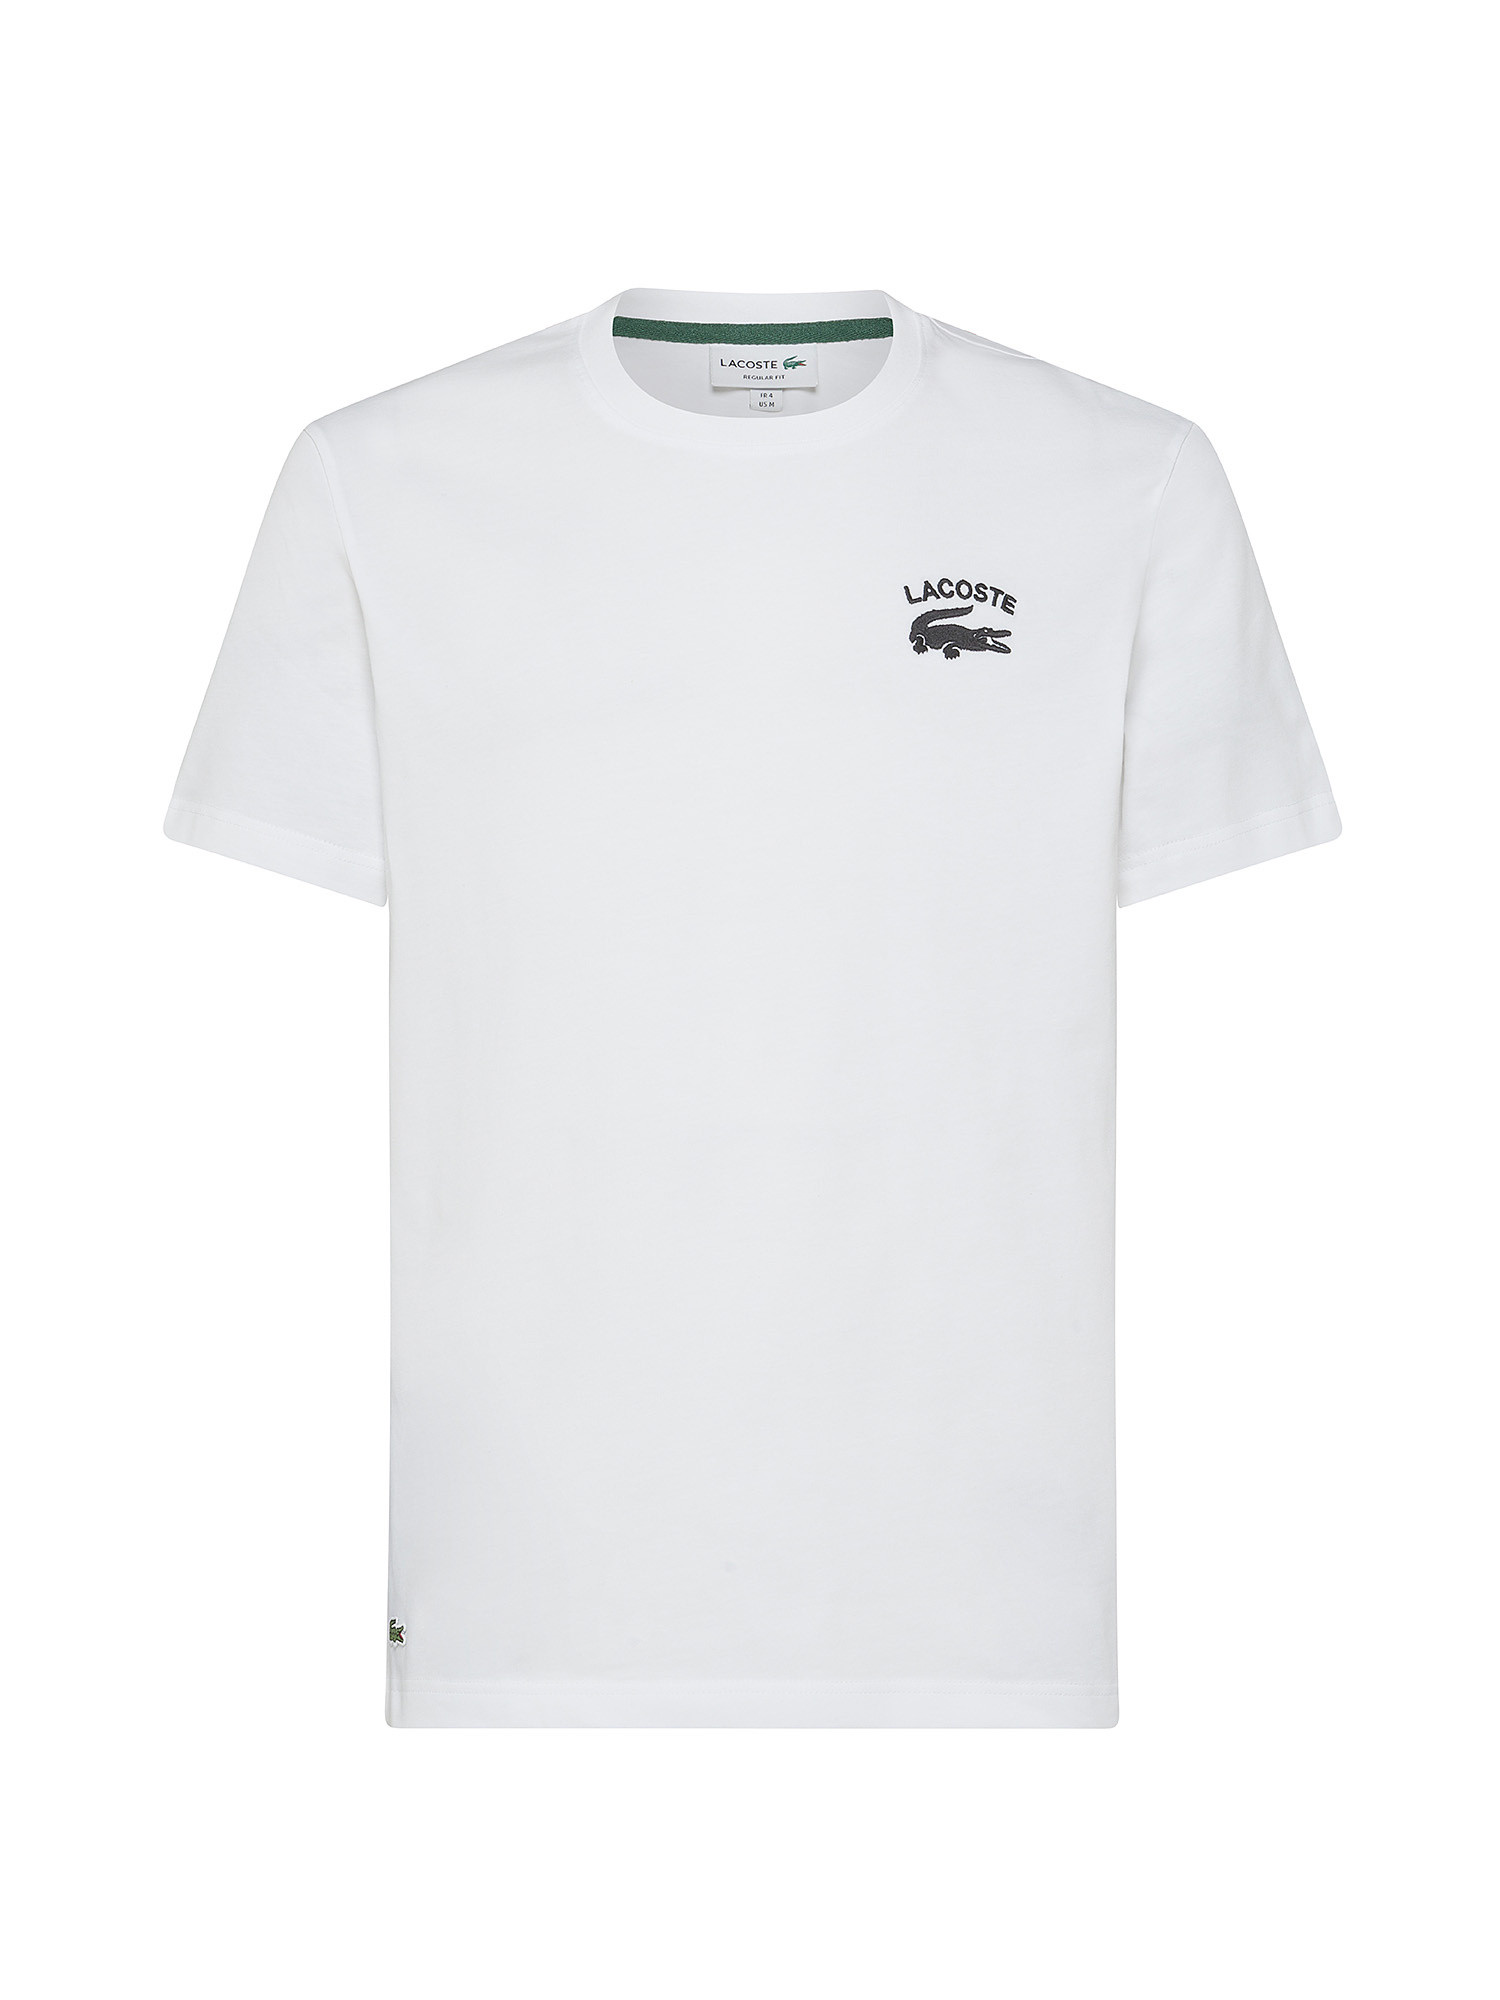 Lacoste - Cotton jersey T-shirt, White, large image number 0